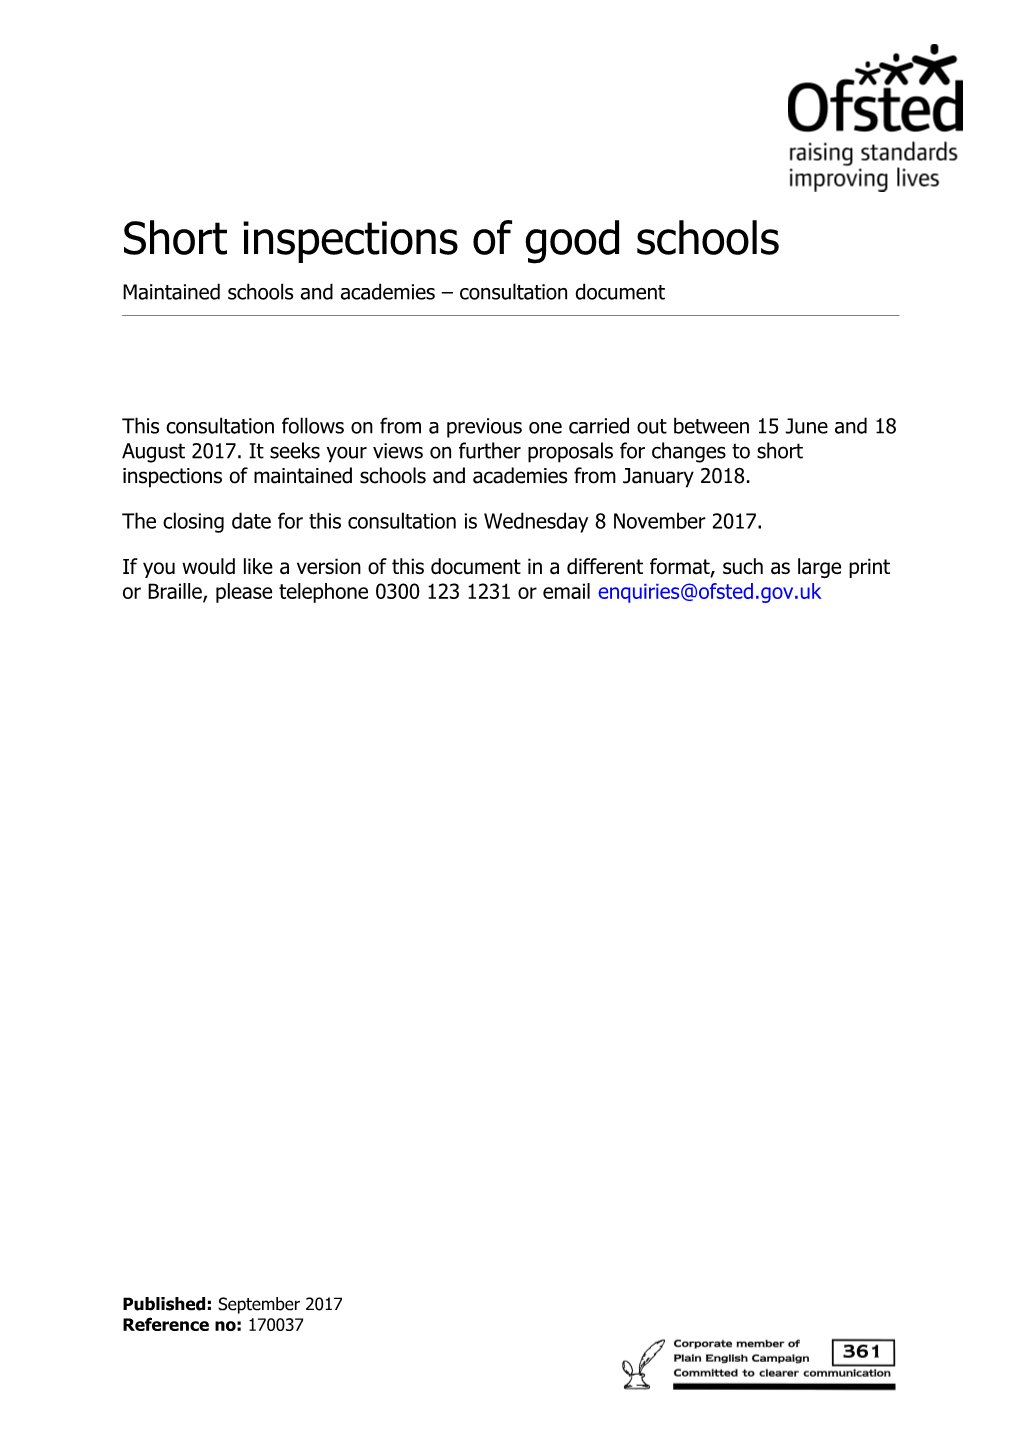 Consultation on Short Inspections: Maintained Schools and Academies